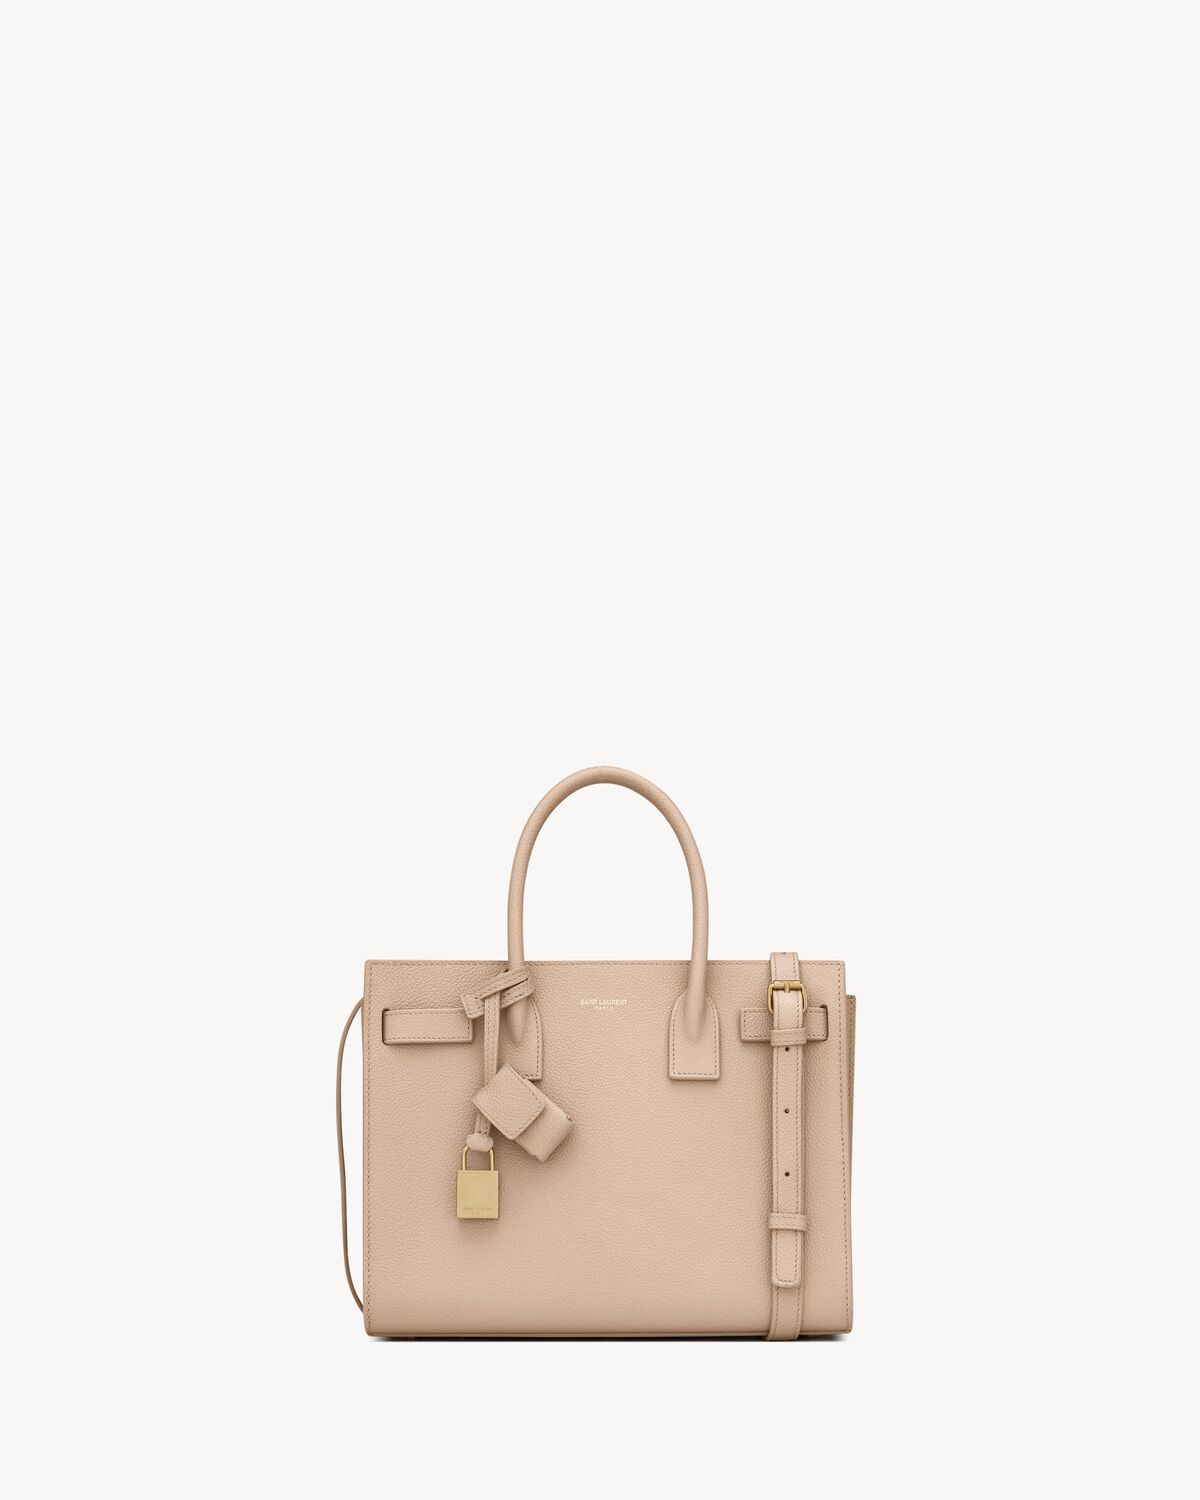 SAC DE JOUR BABY IN GRAINED LEATHER